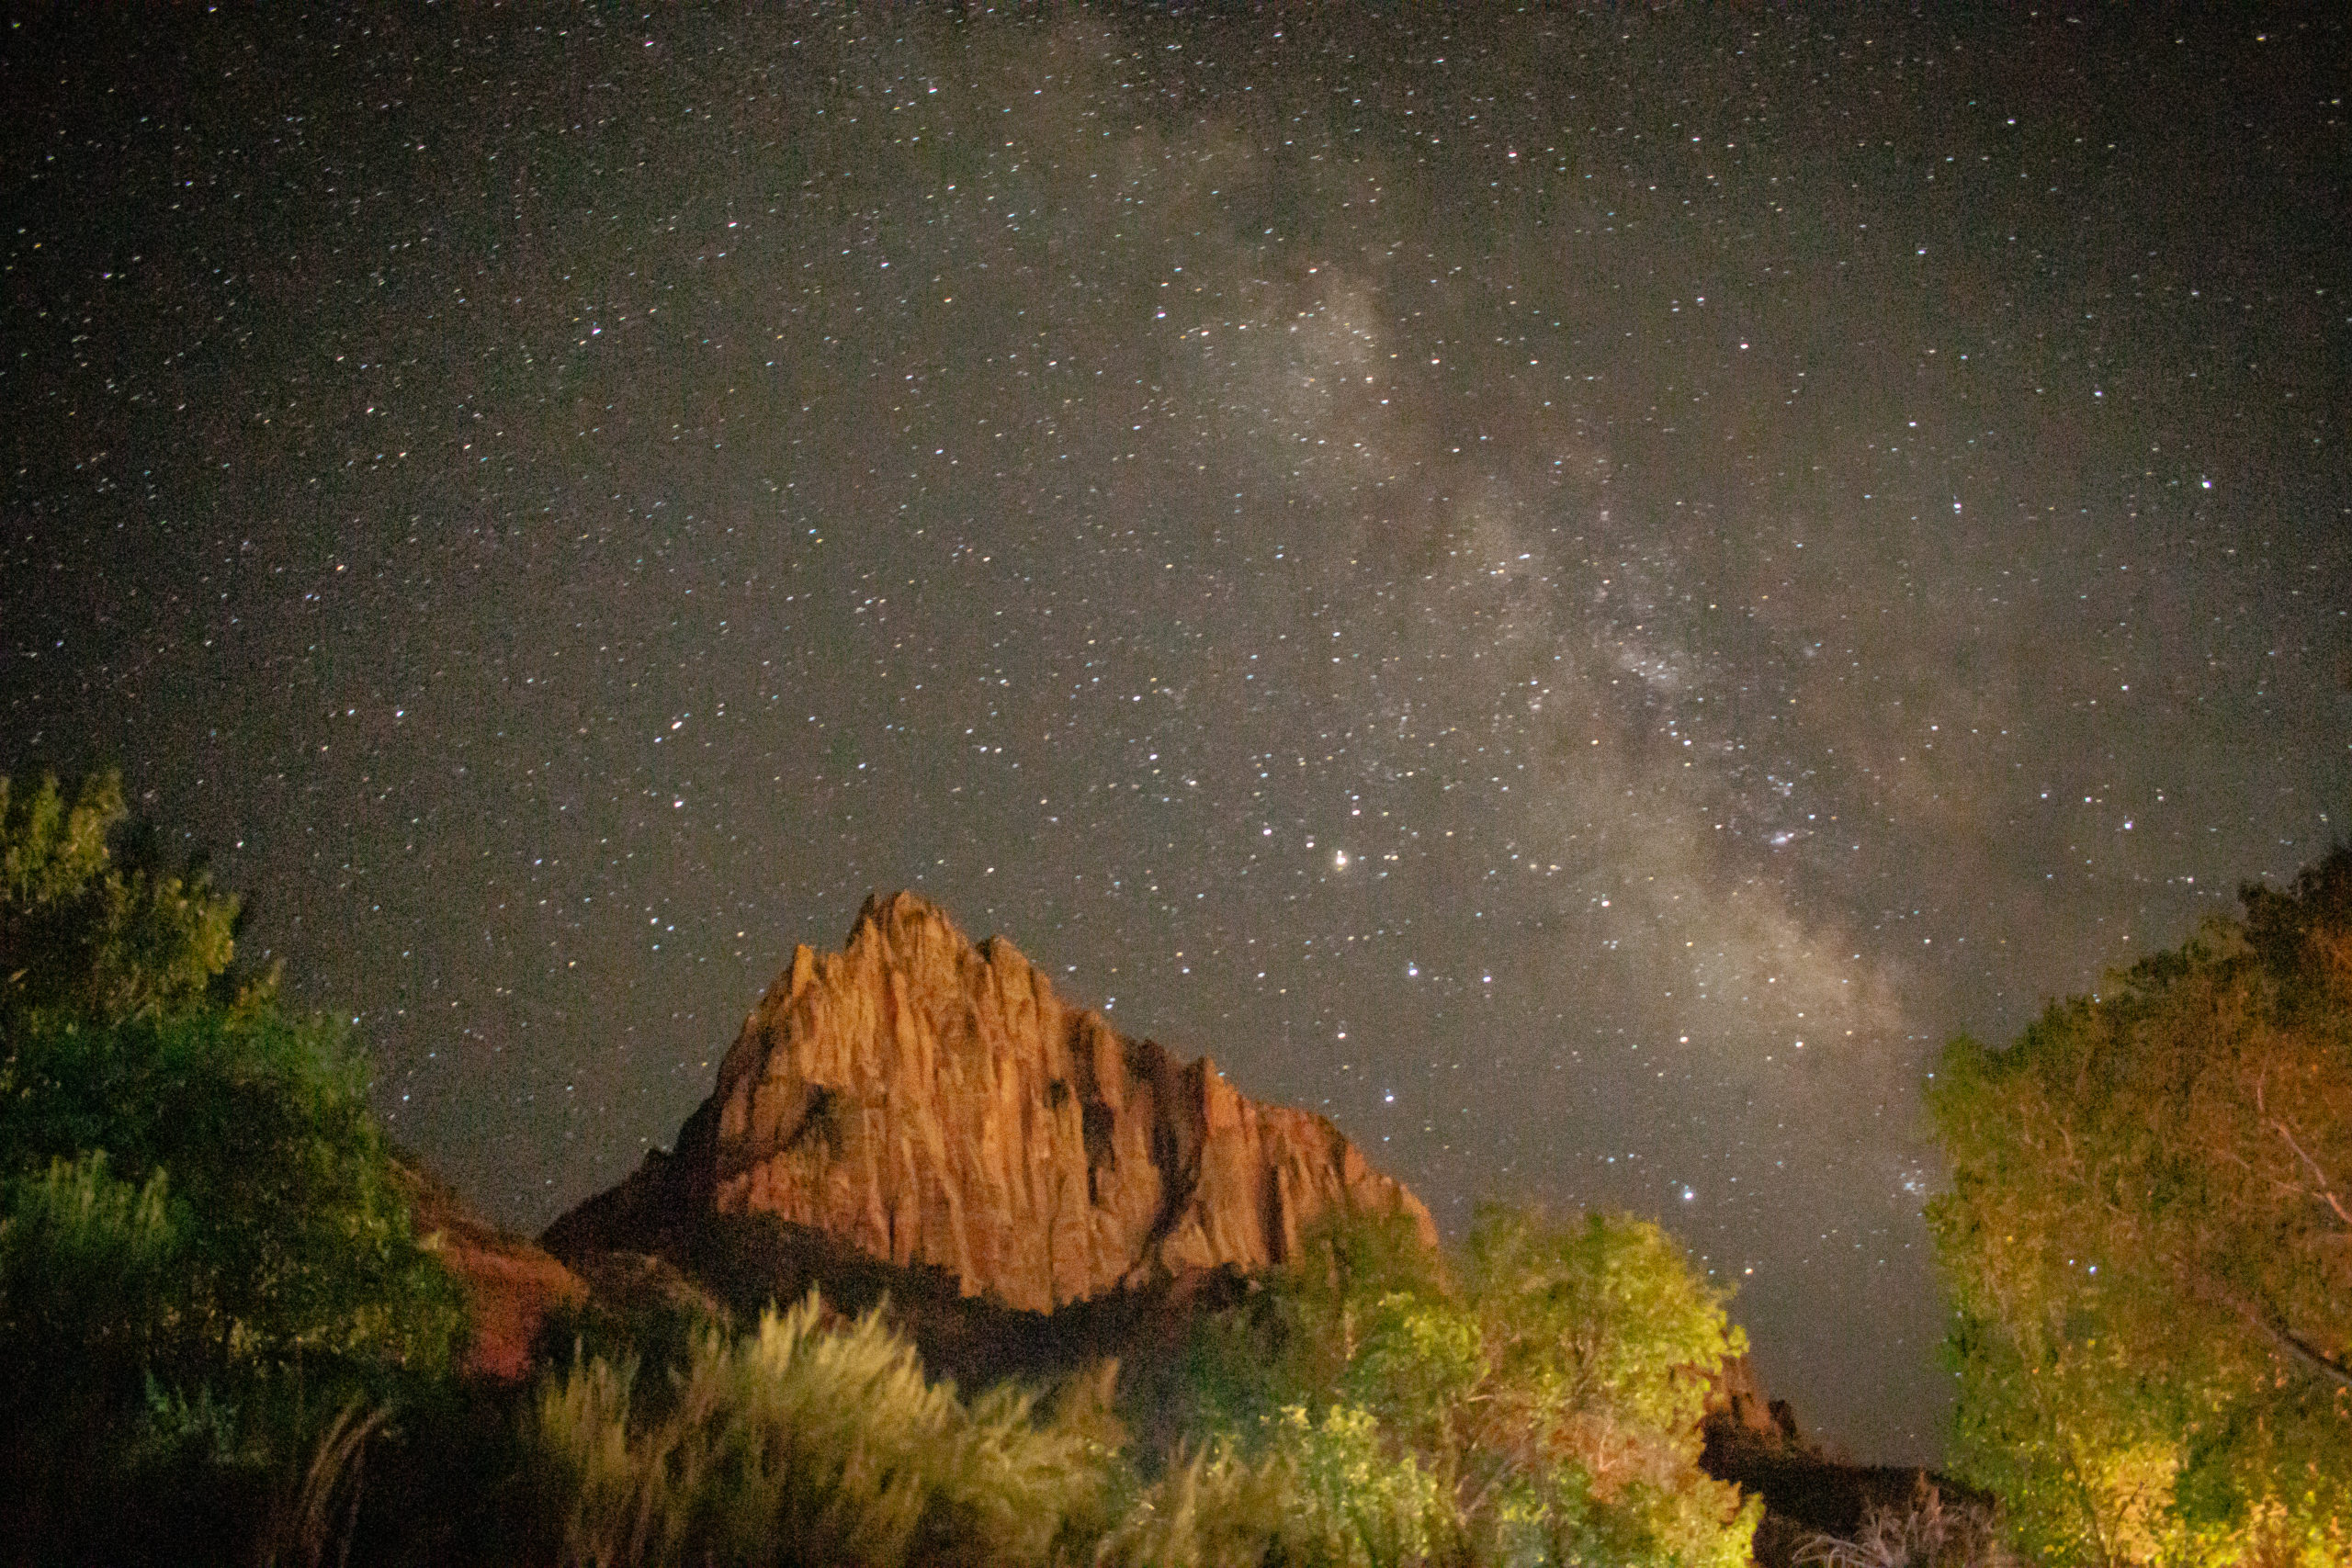 Starry night and the Milky Way in Zion National Park